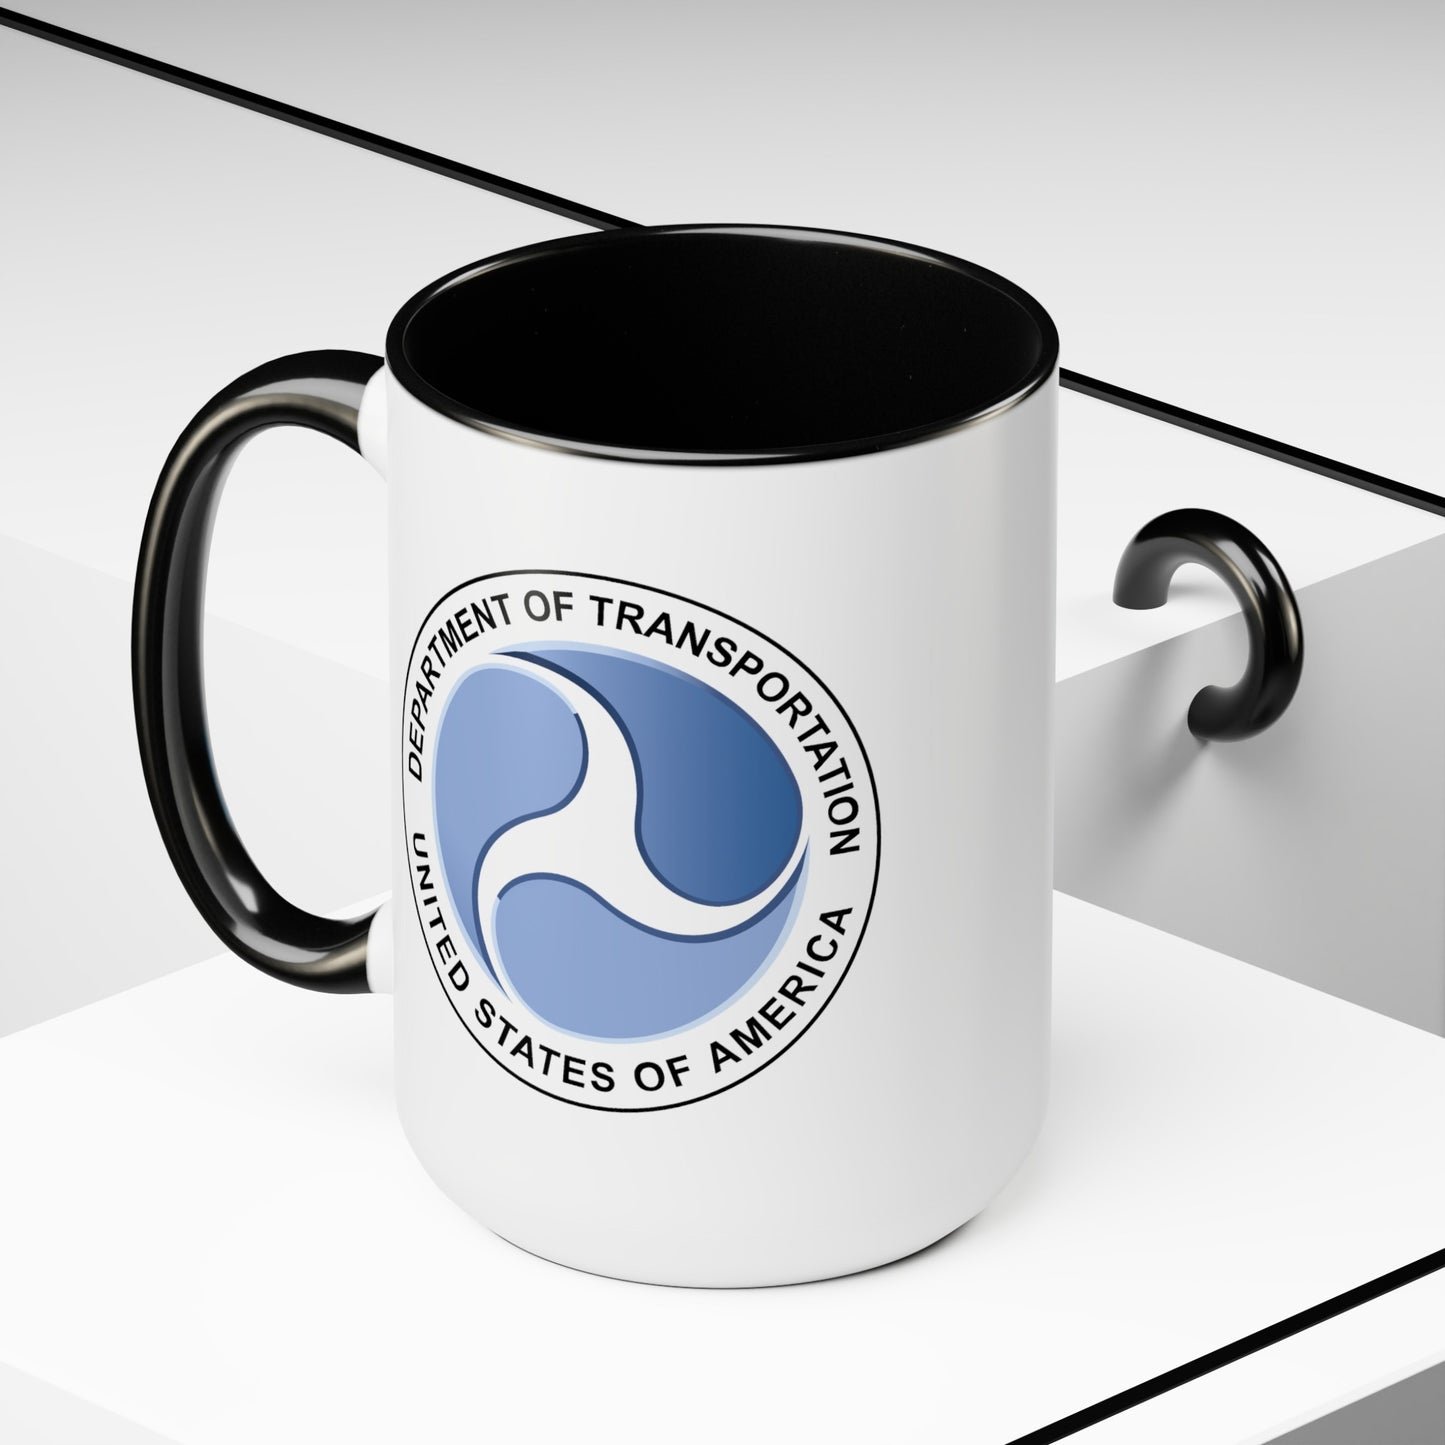 Department of Transportation Coffee Mug - Double Sided Black Accent White Ceramic 15oz by TheGlassyLass.com